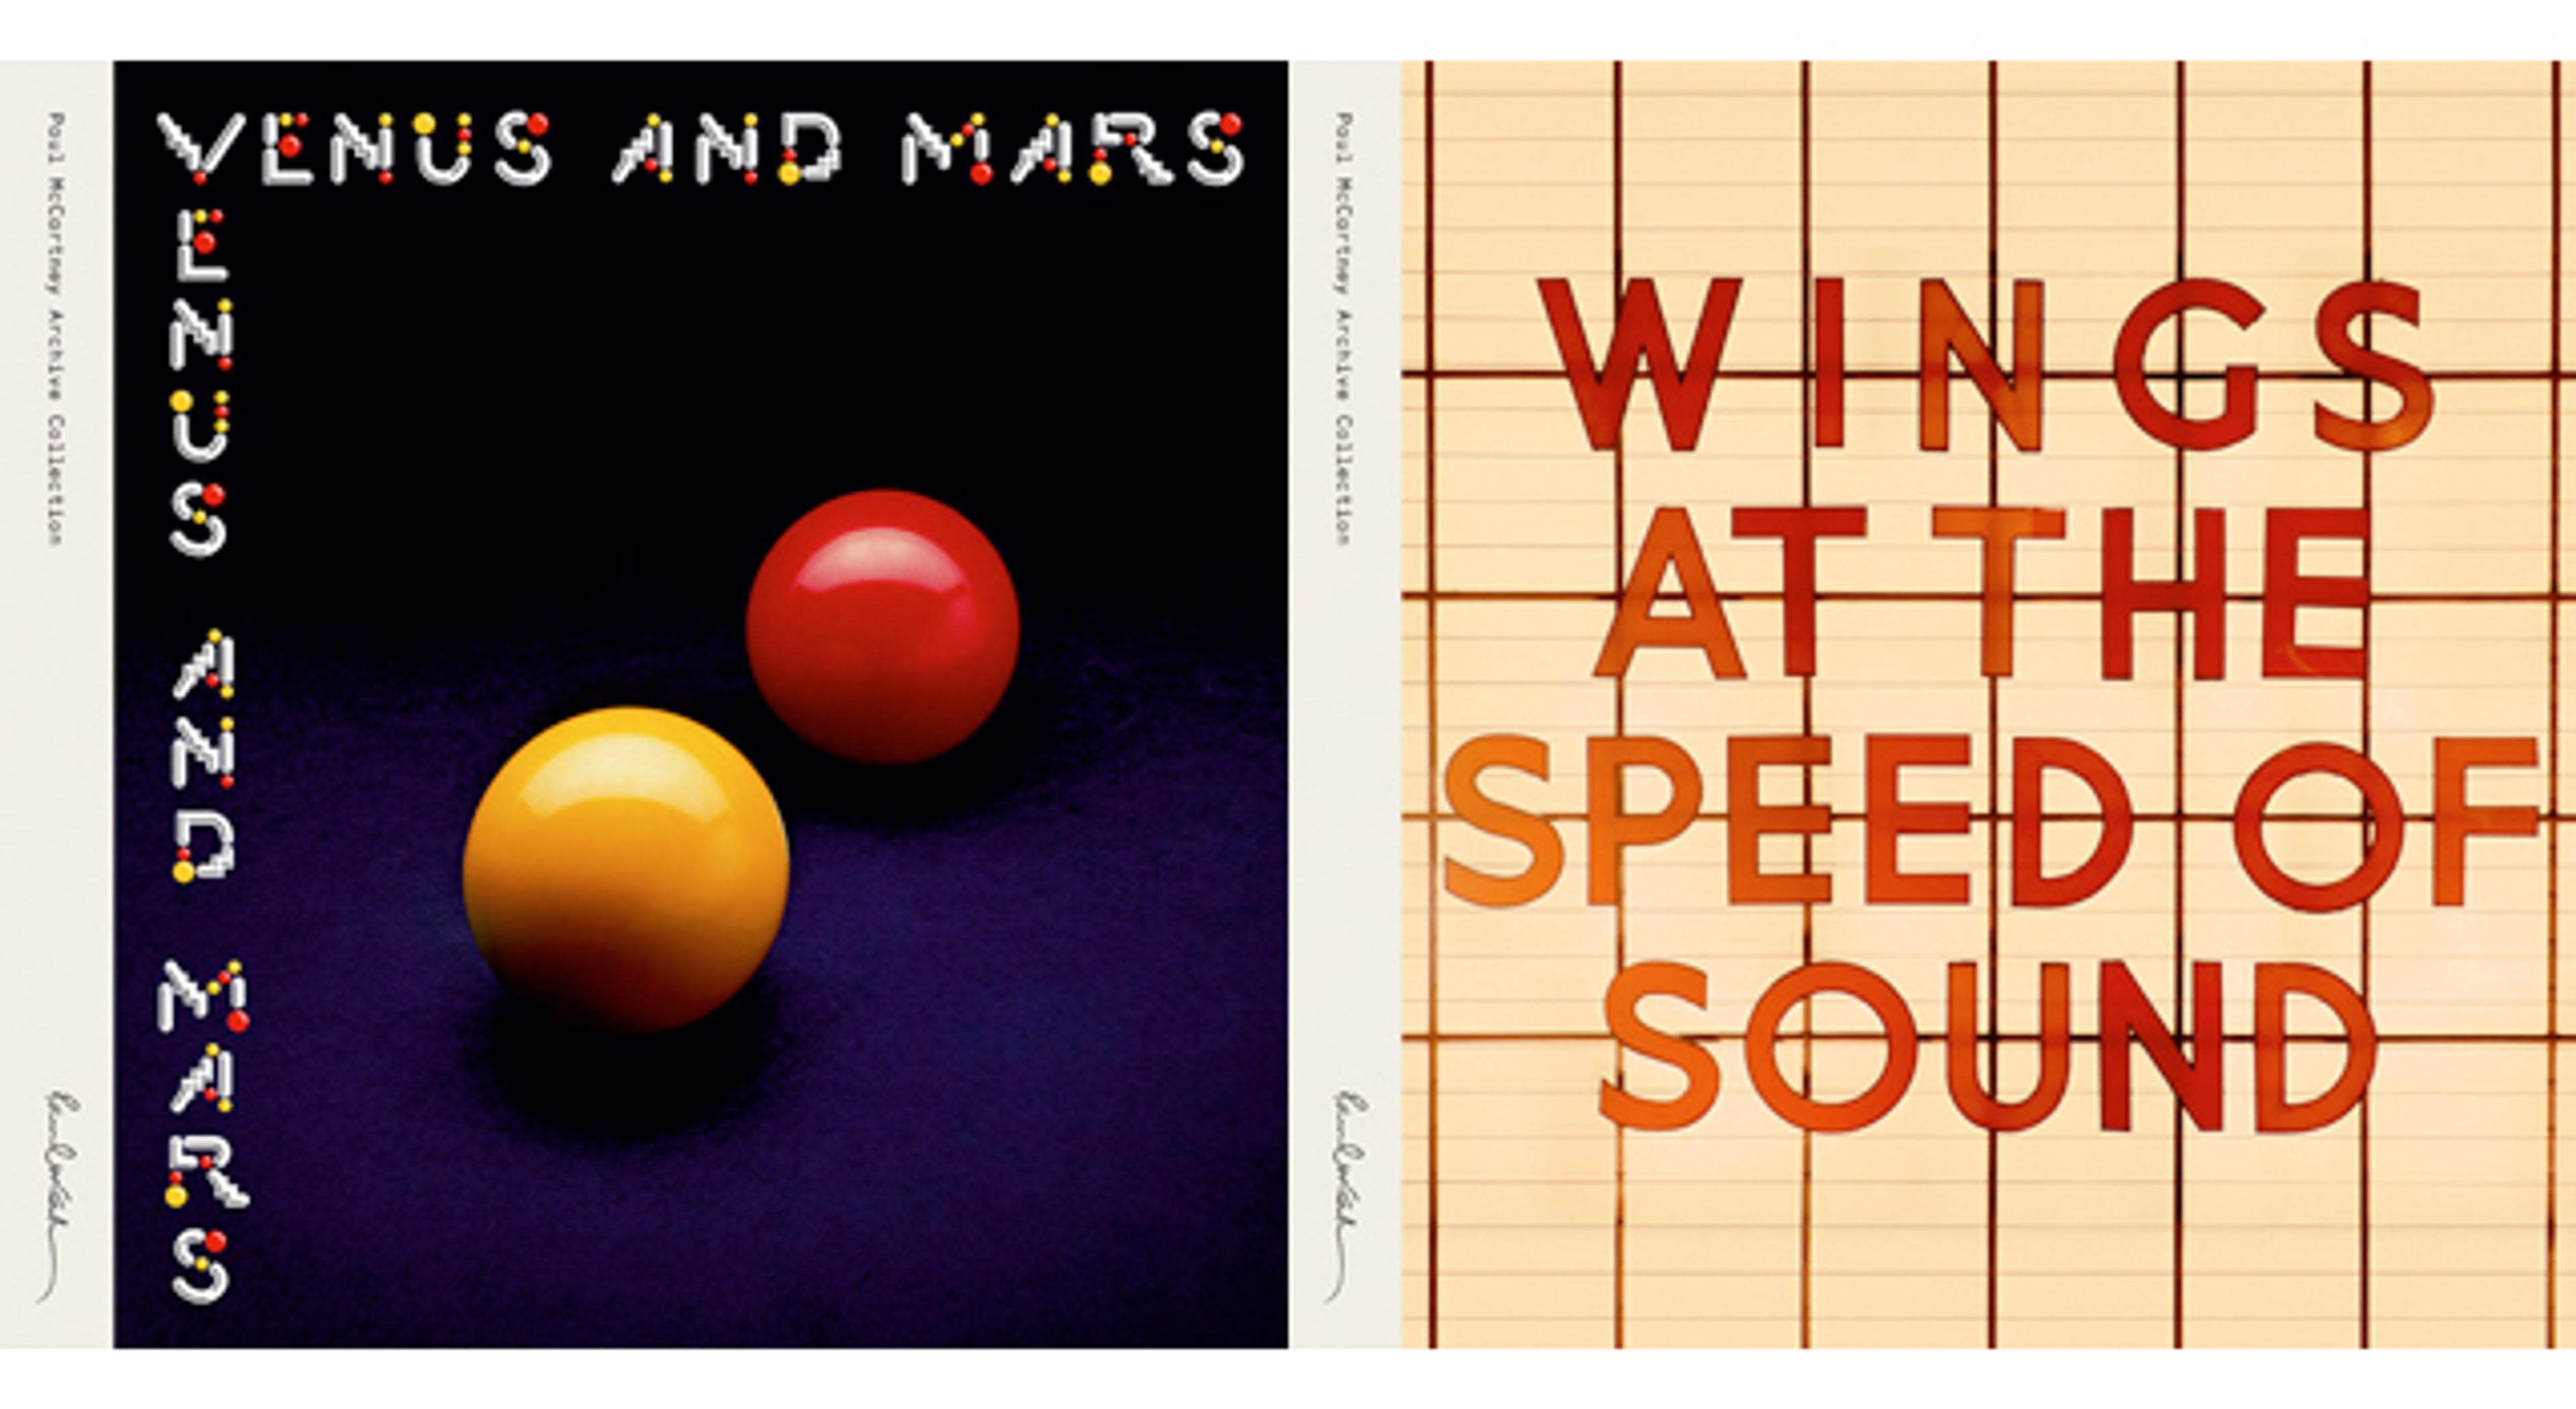 'Venus and Mars' and 'At The Speed Of Sound' - Out Now	